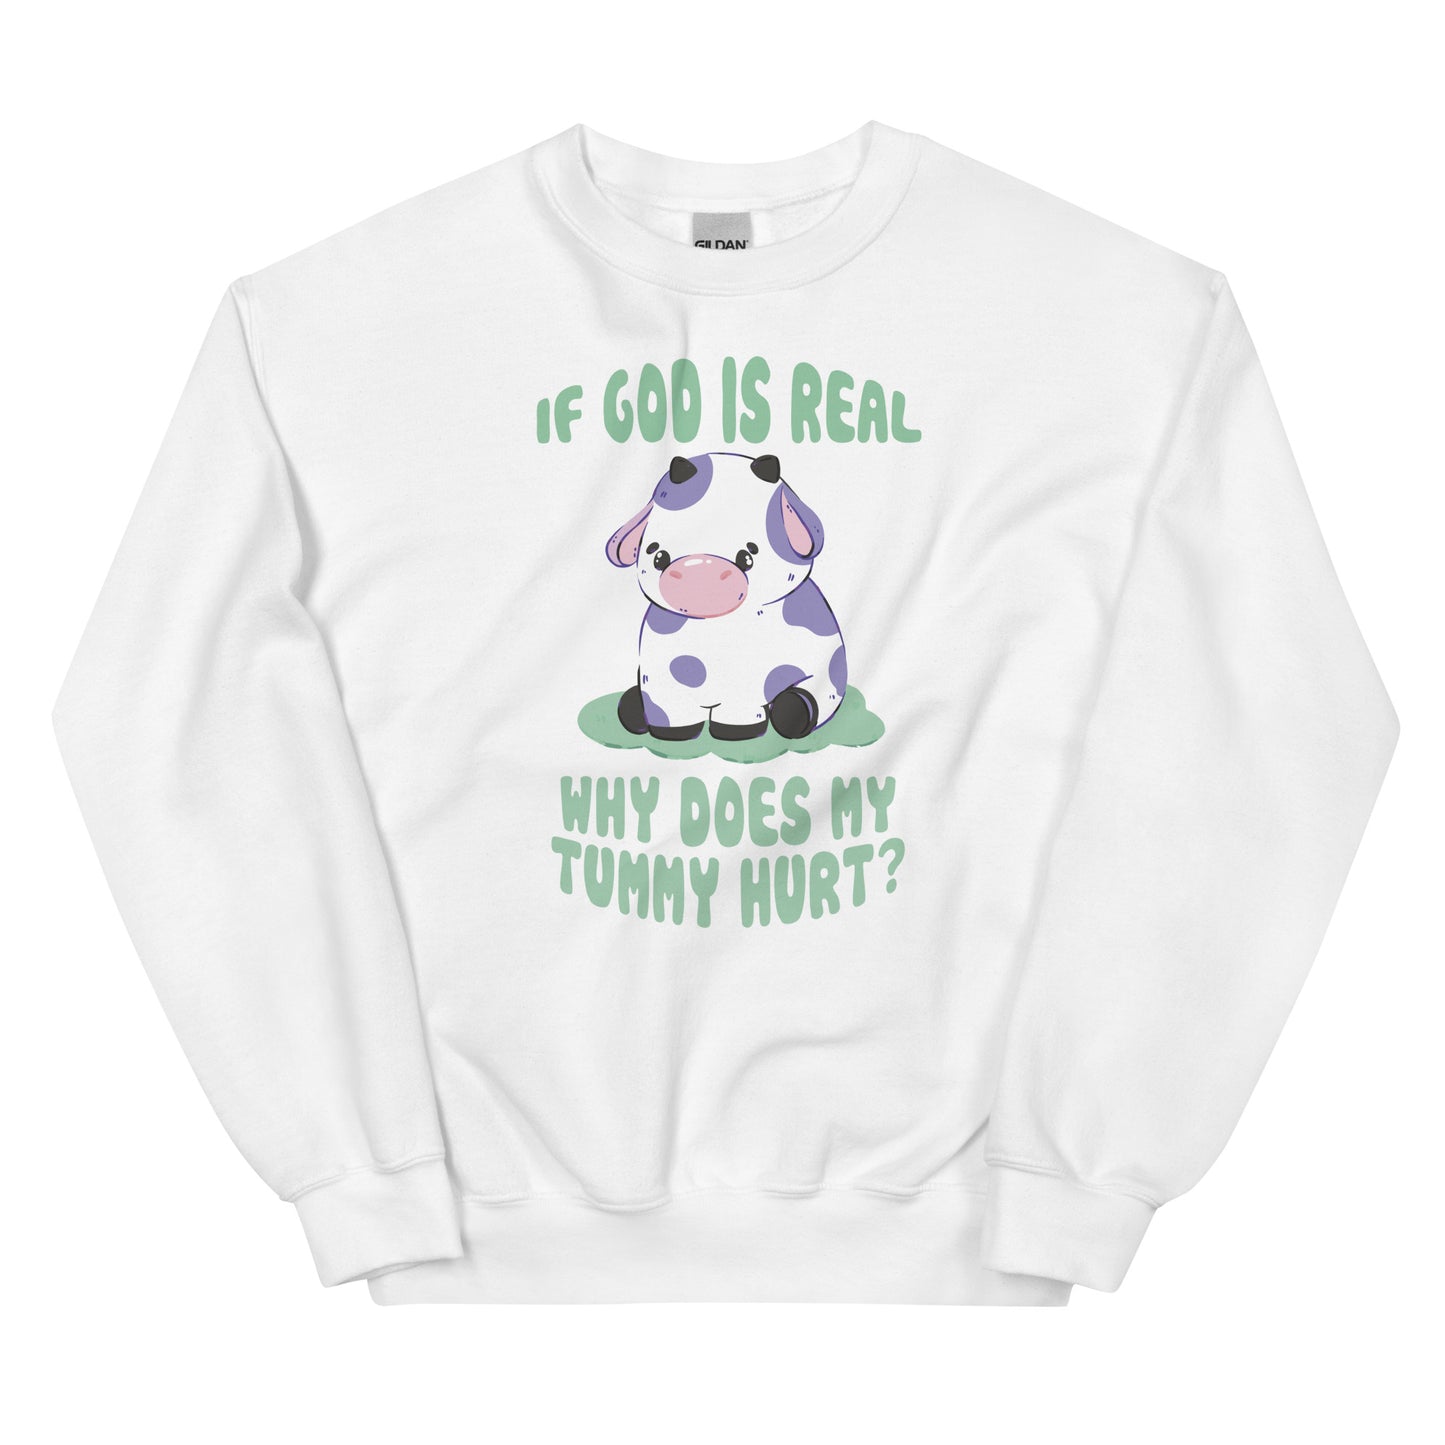 If God Is Real Why Does My Tummy Hurt (Cow) Unisex Sweatshirt